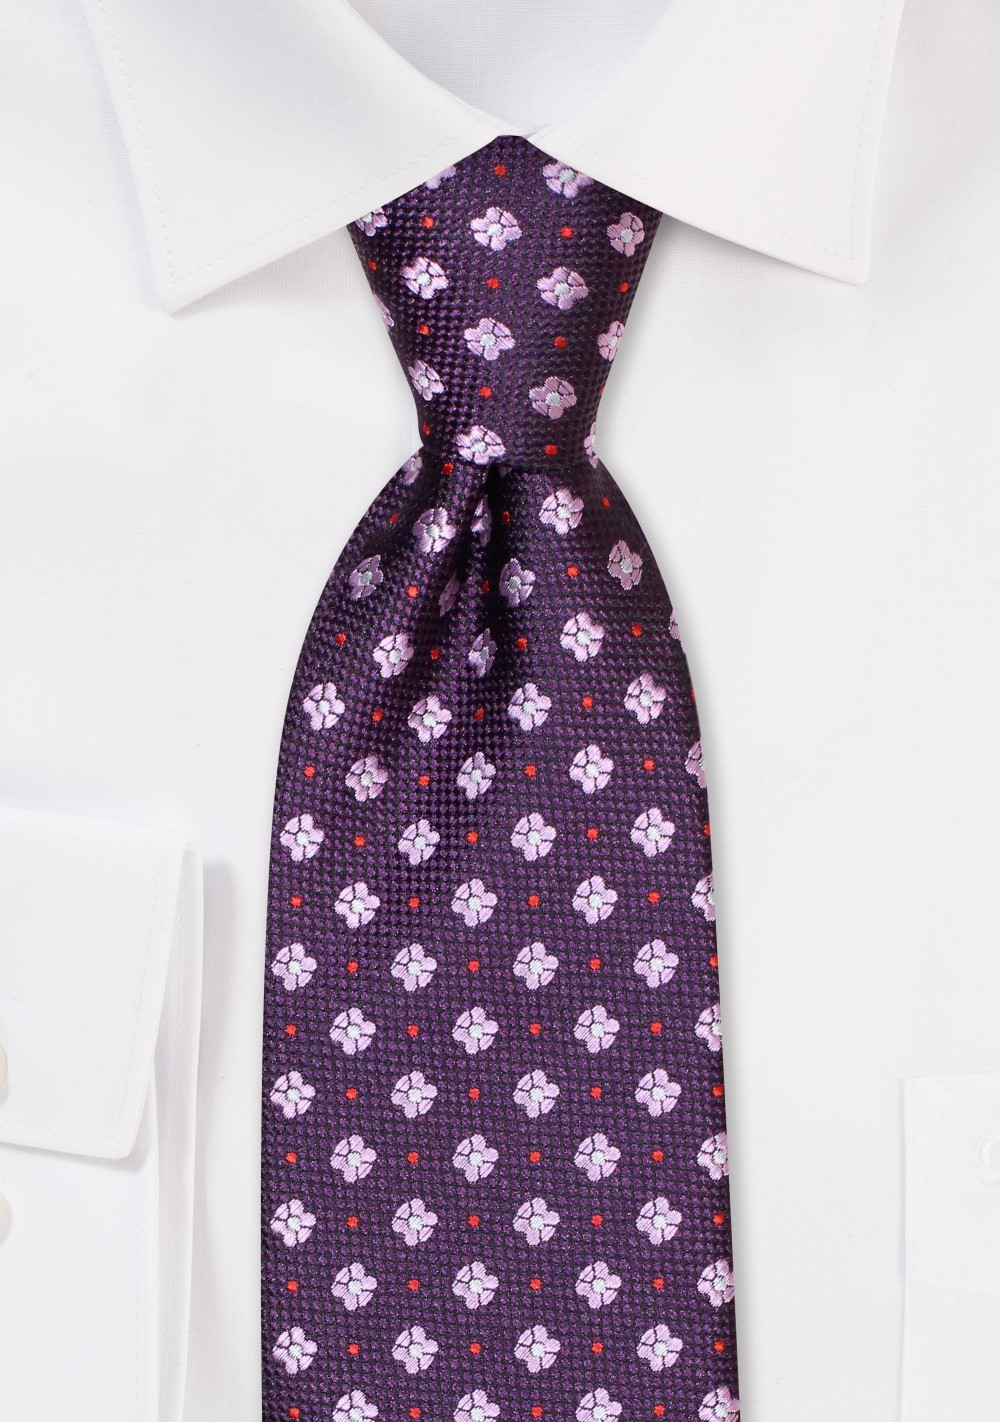 Eggplant and Lilac Floral Tie